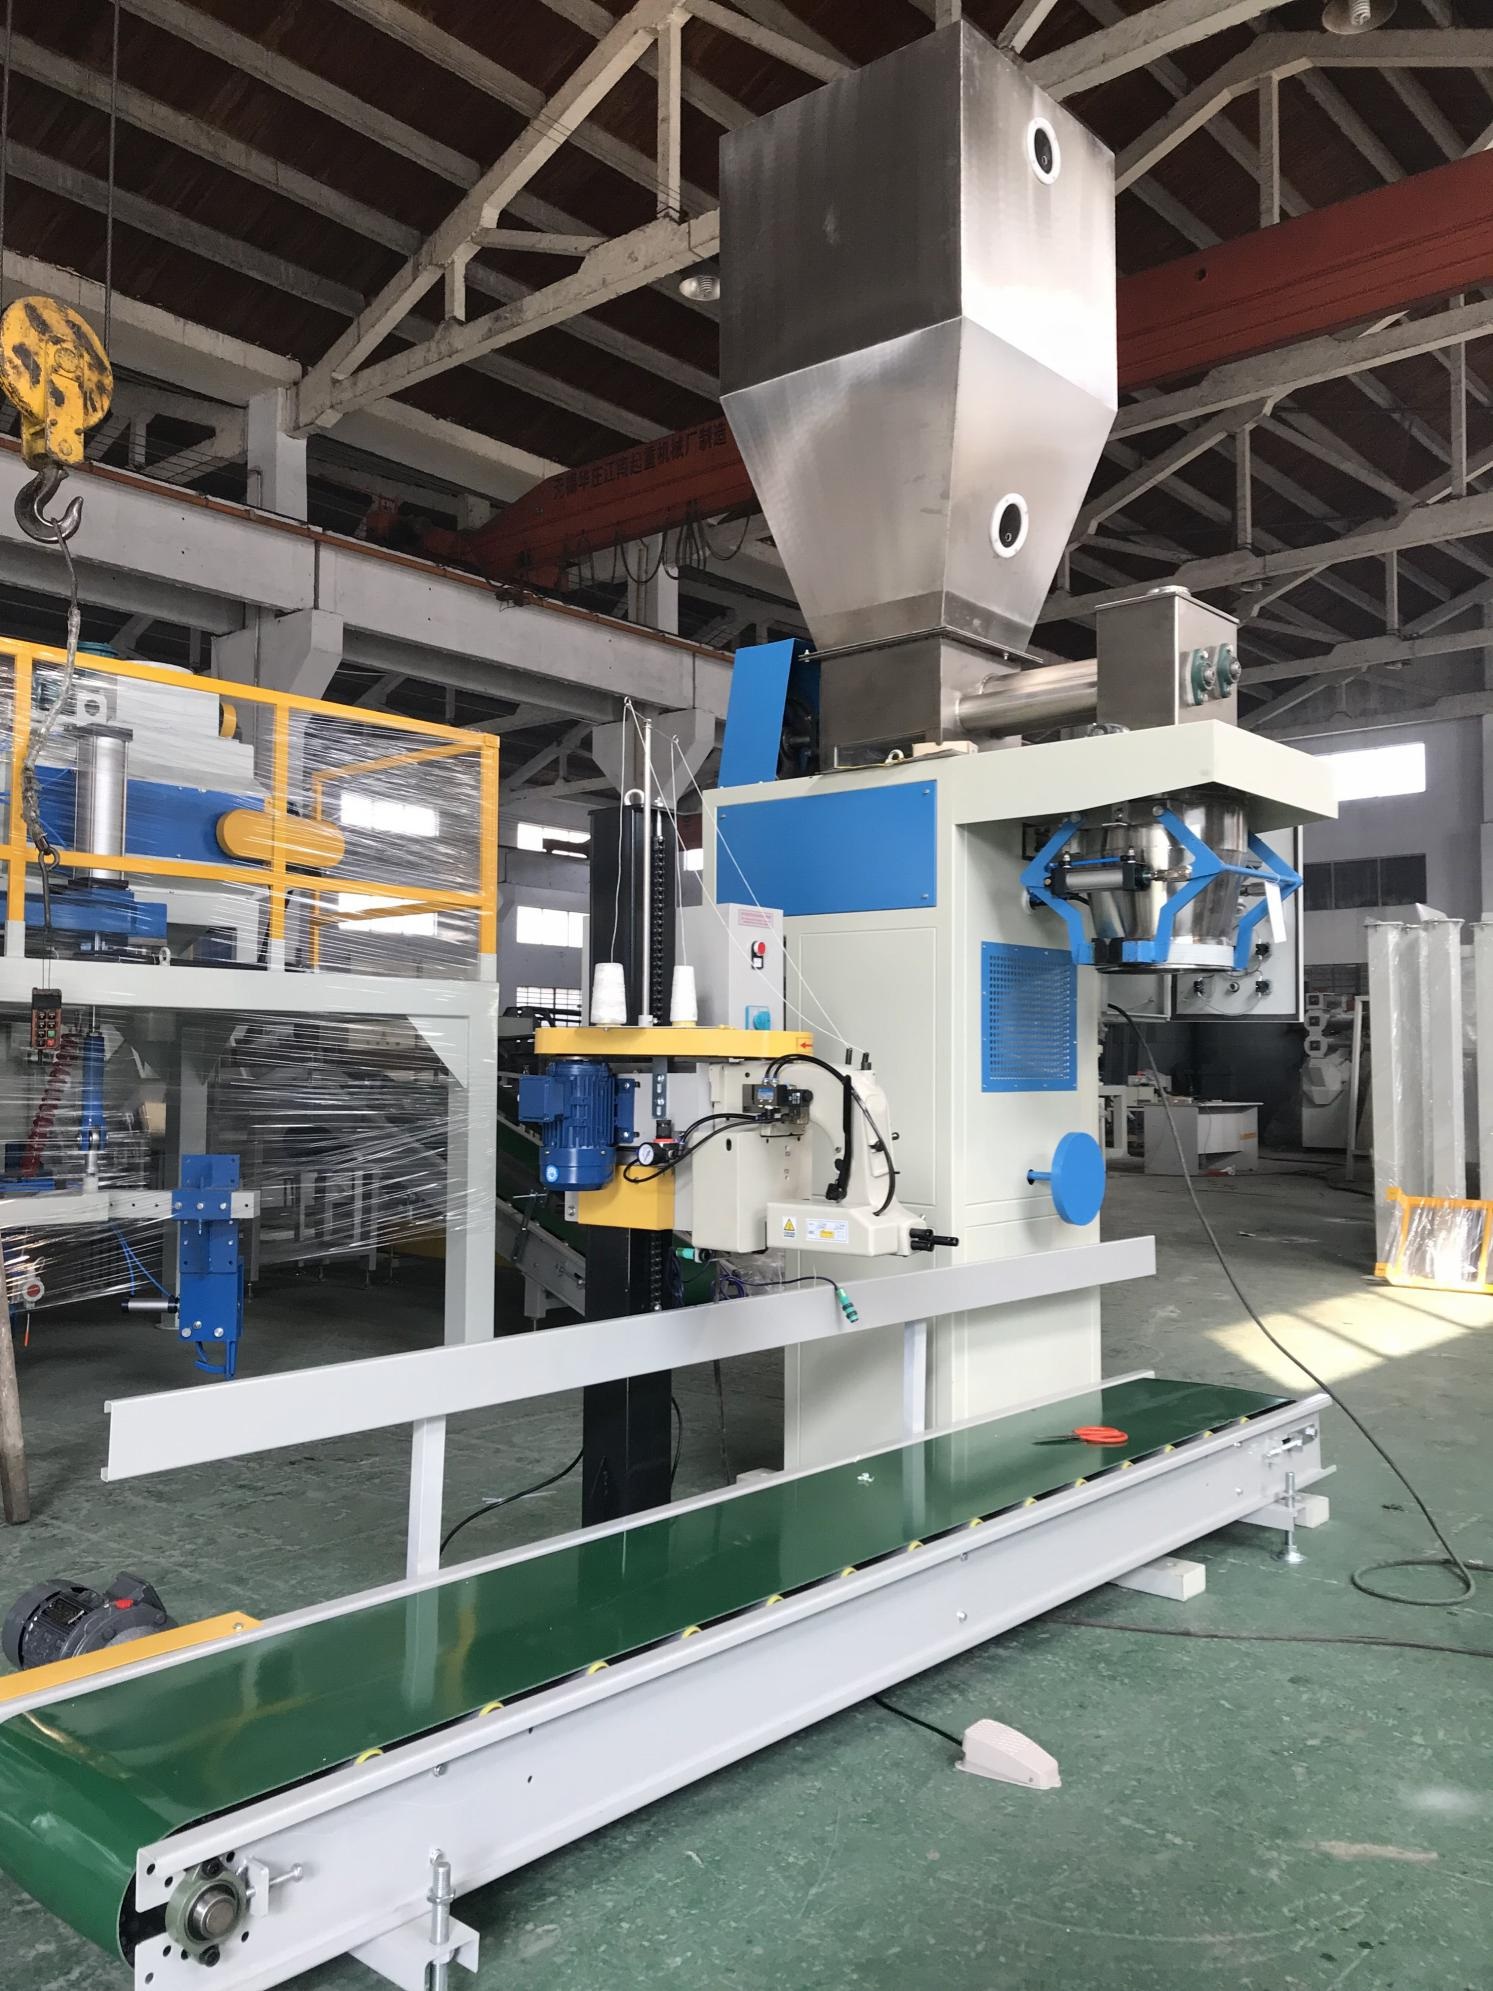 Powder Packing Machine automated bagging line 无锡航一机械有限公司 Weighing Bagging Machine, Fully Automatic Bagging Line Robot Palletizer Line, High Level Palletizer System, Containerised Bagging System, FIBC 